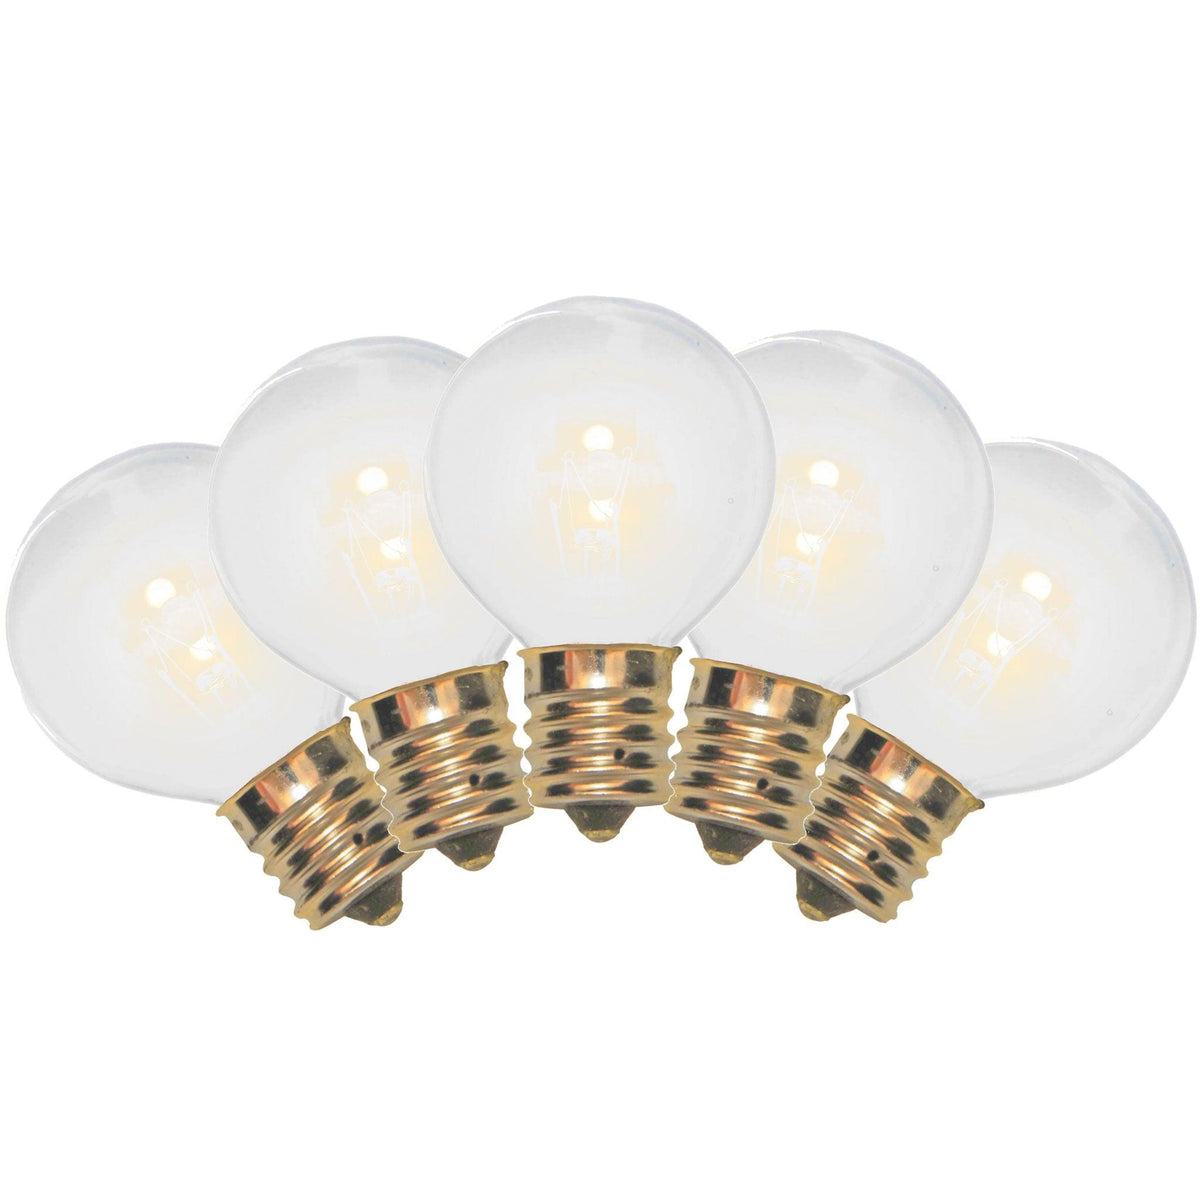 1 Box of 25 of brand new opaque White G40 Globe Light Bulbs Replace your old bulbs today at leedisplay.com